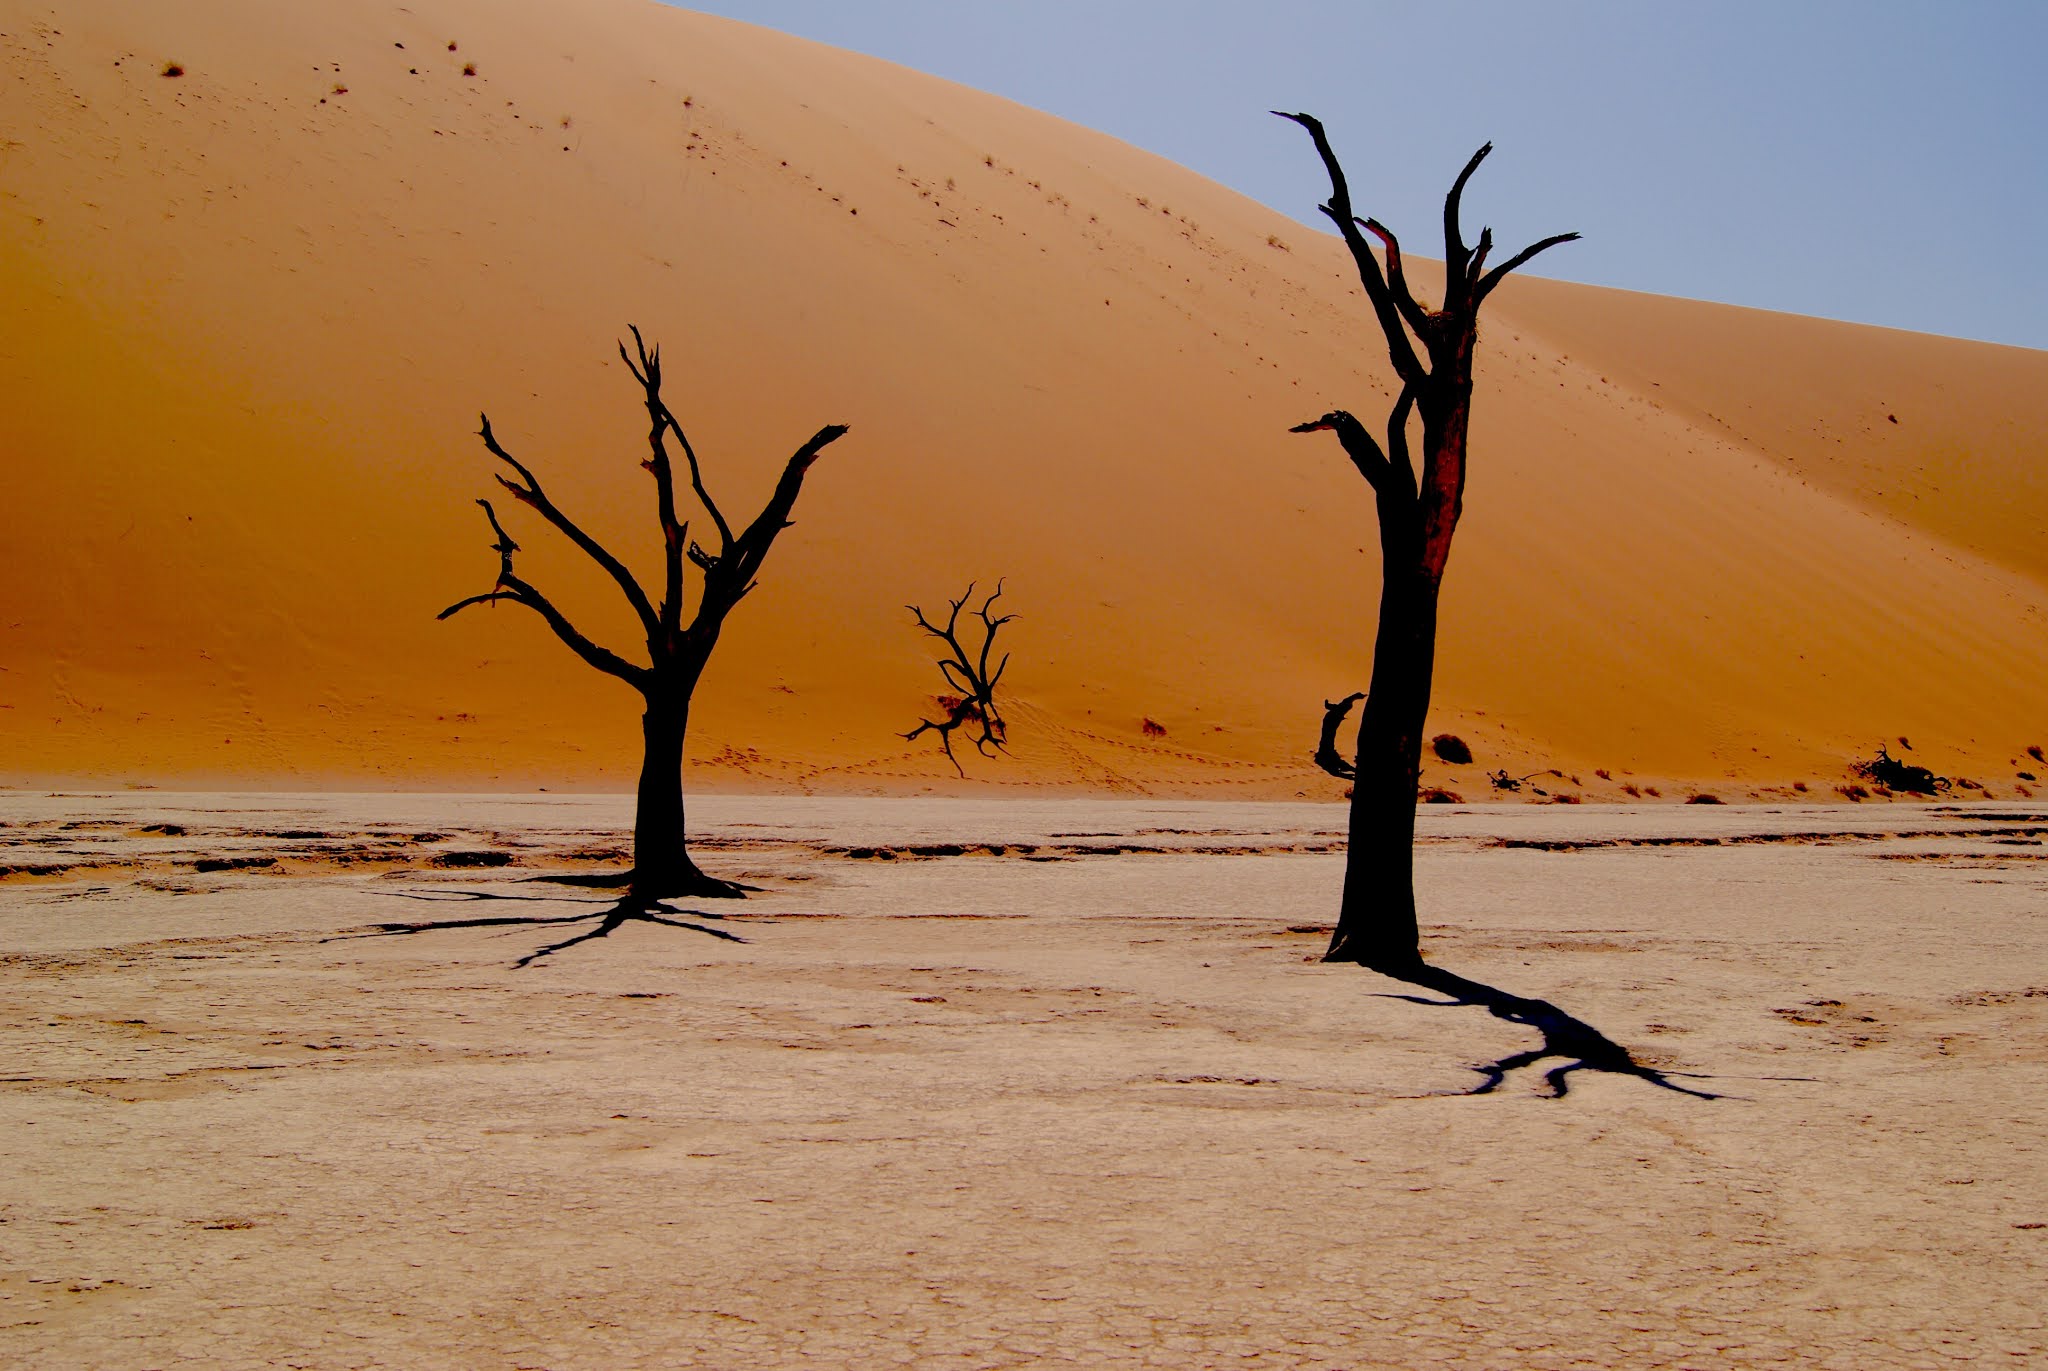 Three trees in the Deadvlei Hiking Trail in Namibia